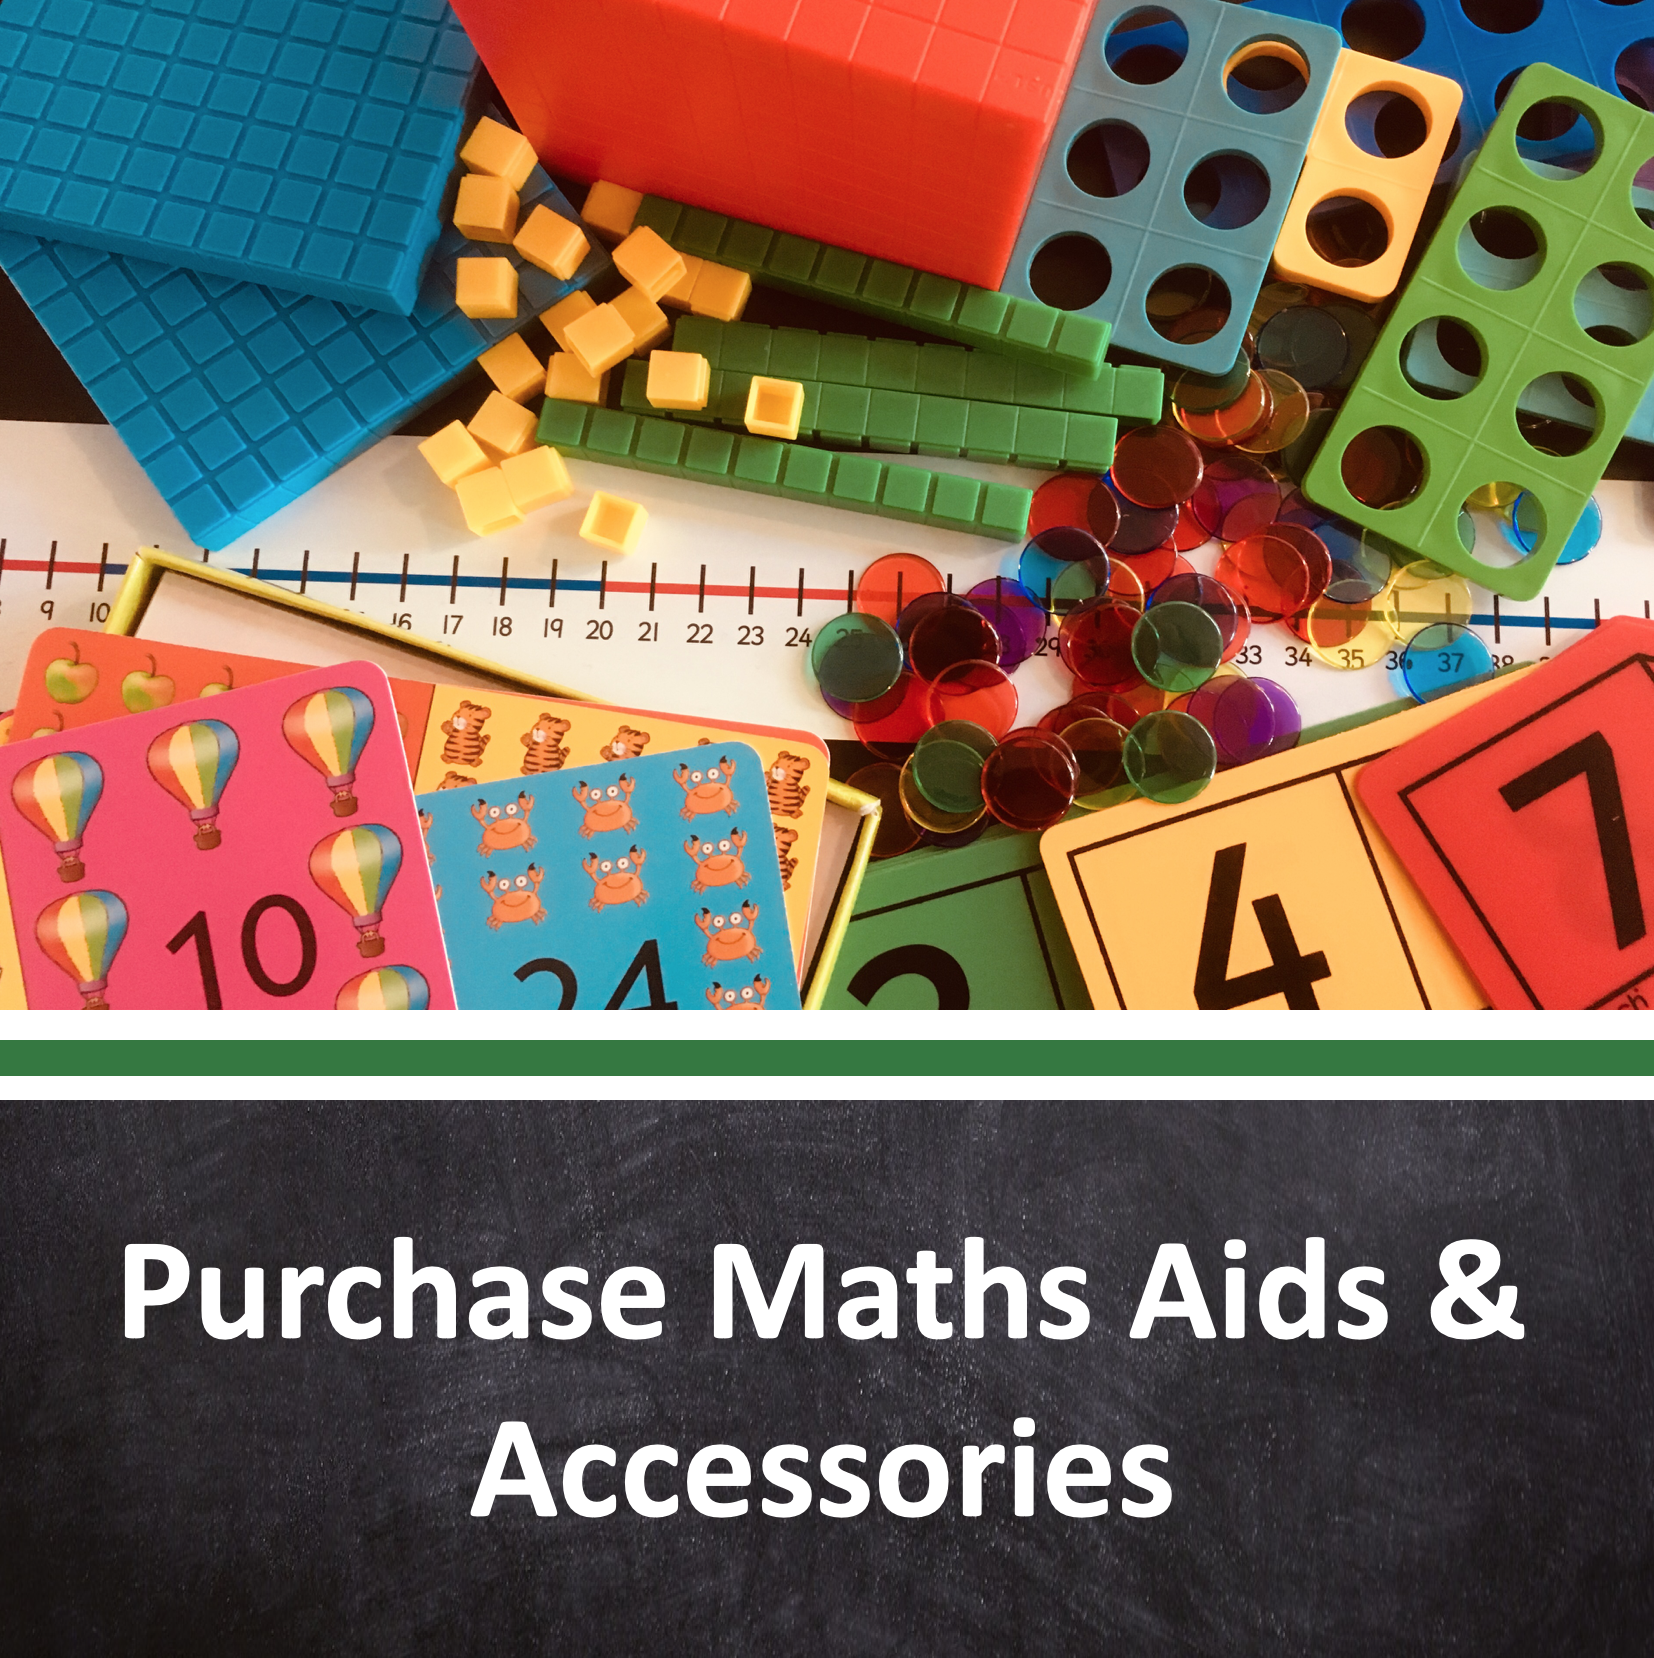 Shop for Maths Aids and Accessories